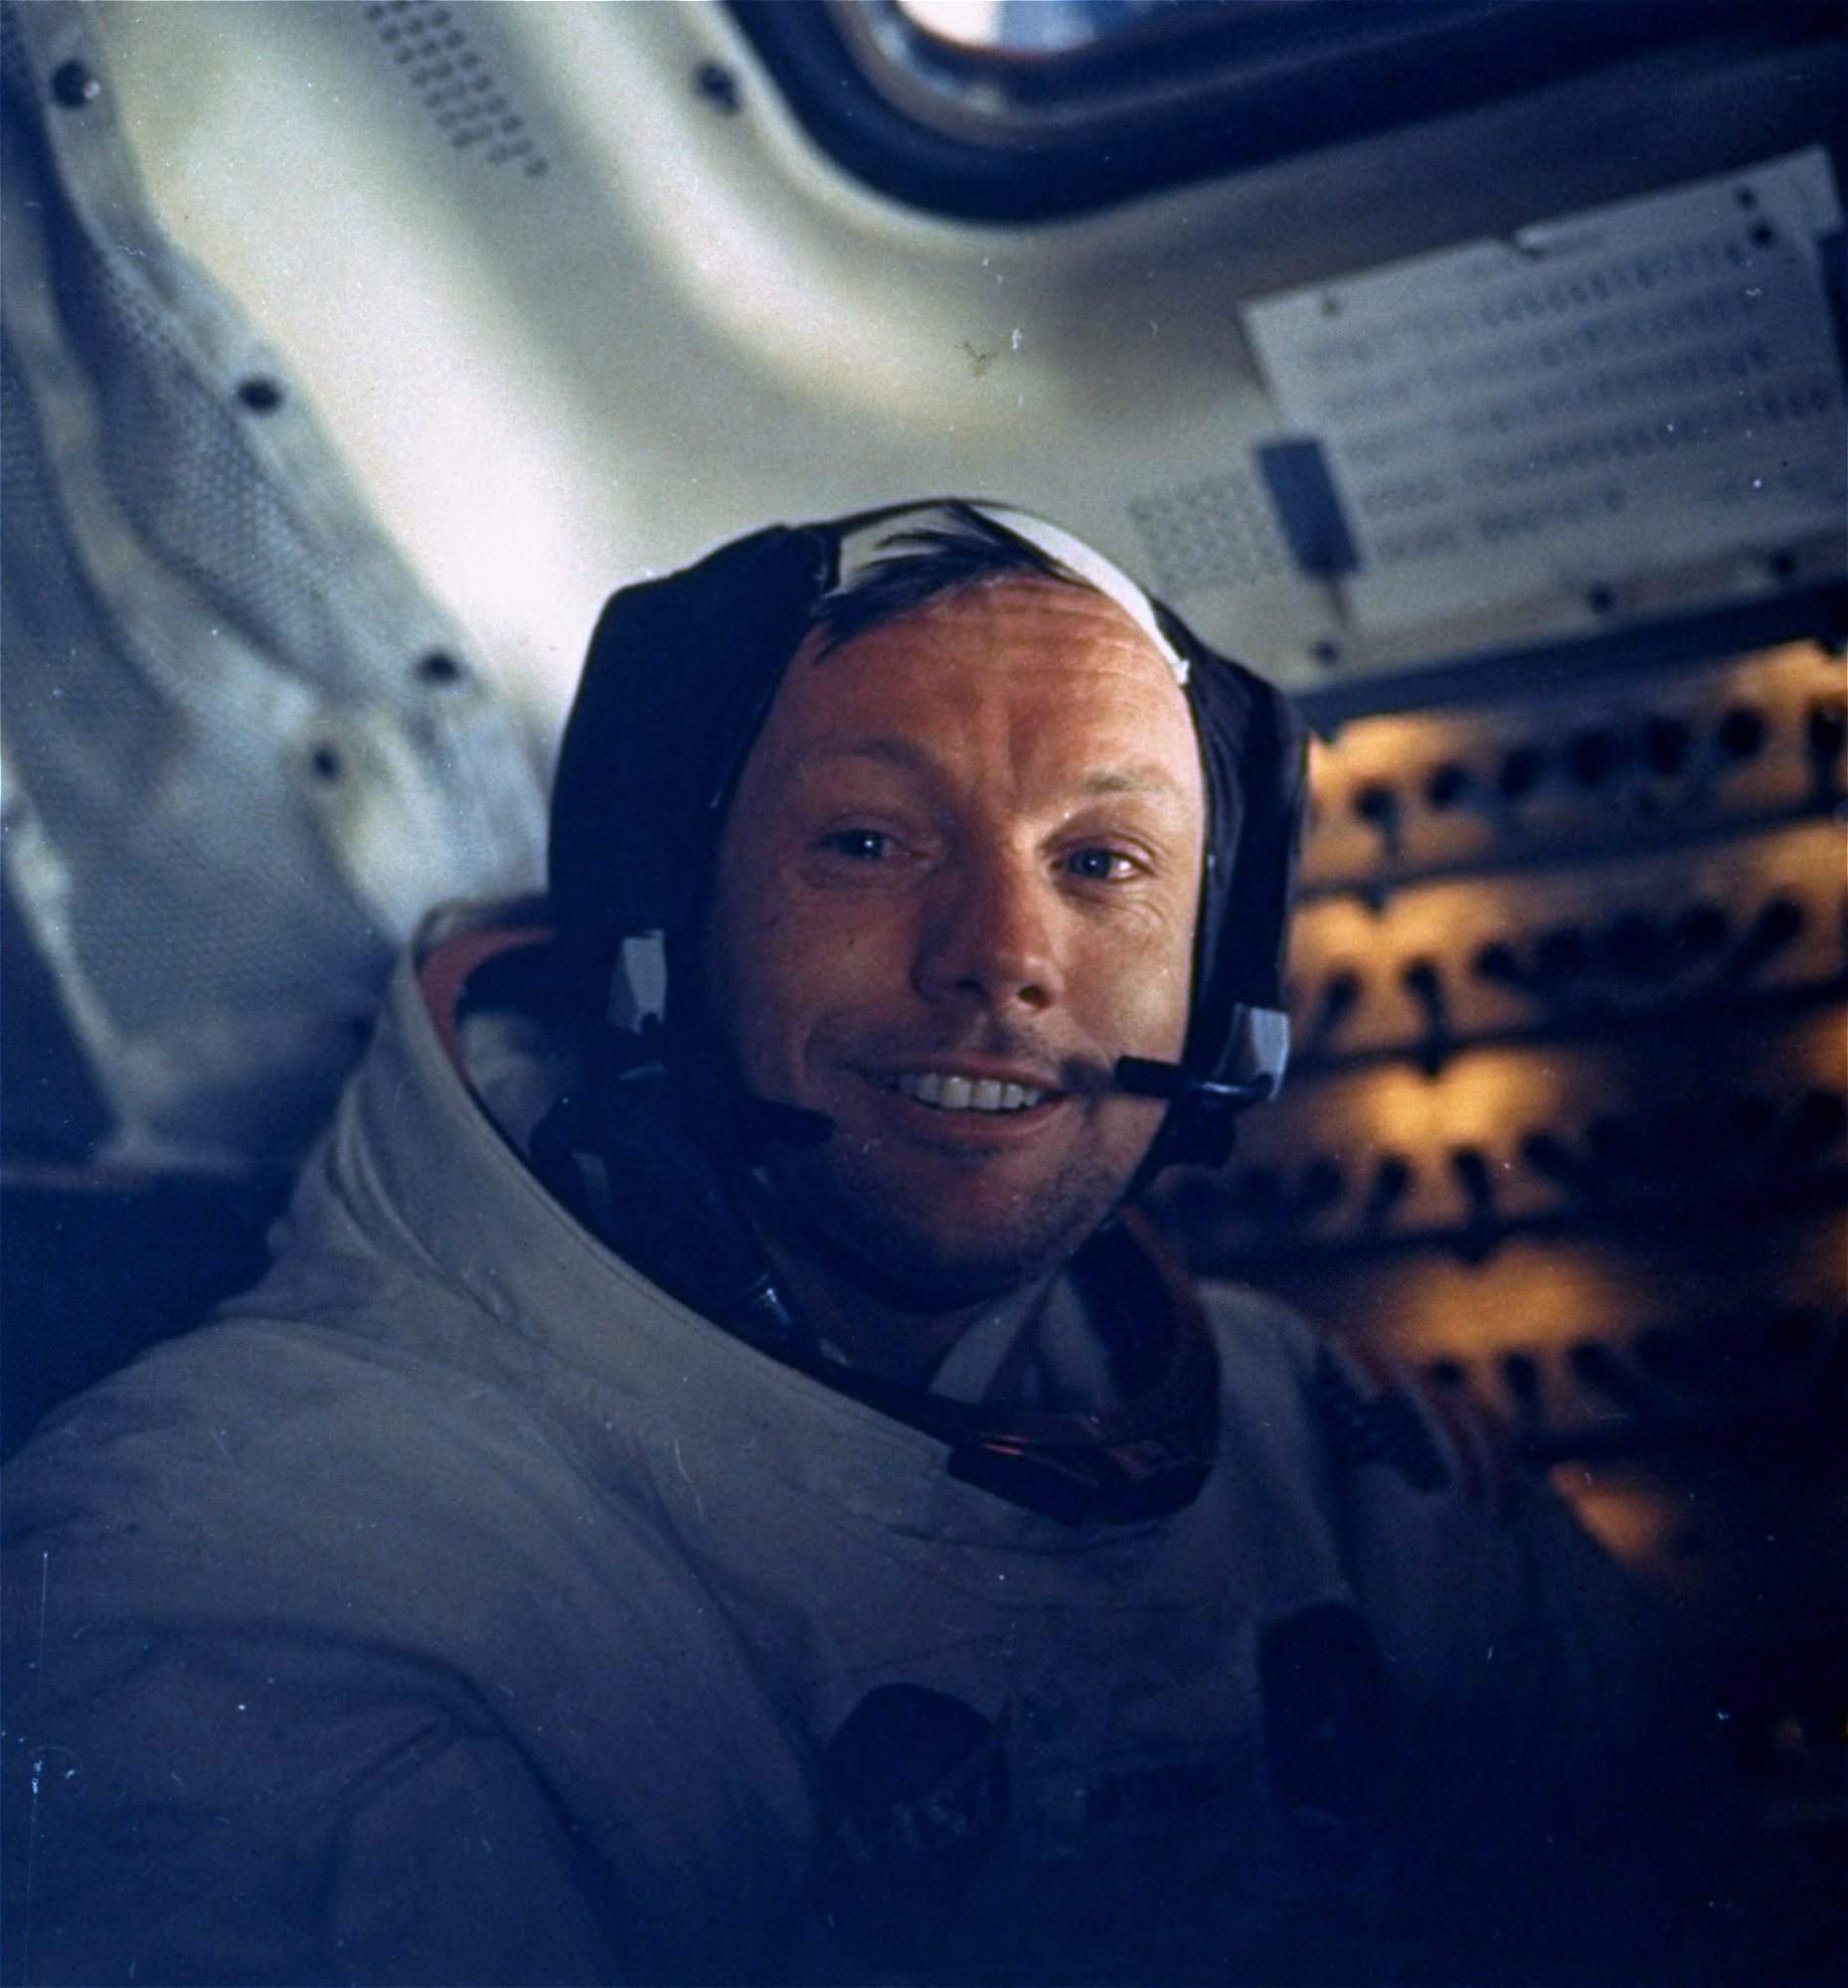 Neil Armstrong in the LM shortly after walking on the Moon.